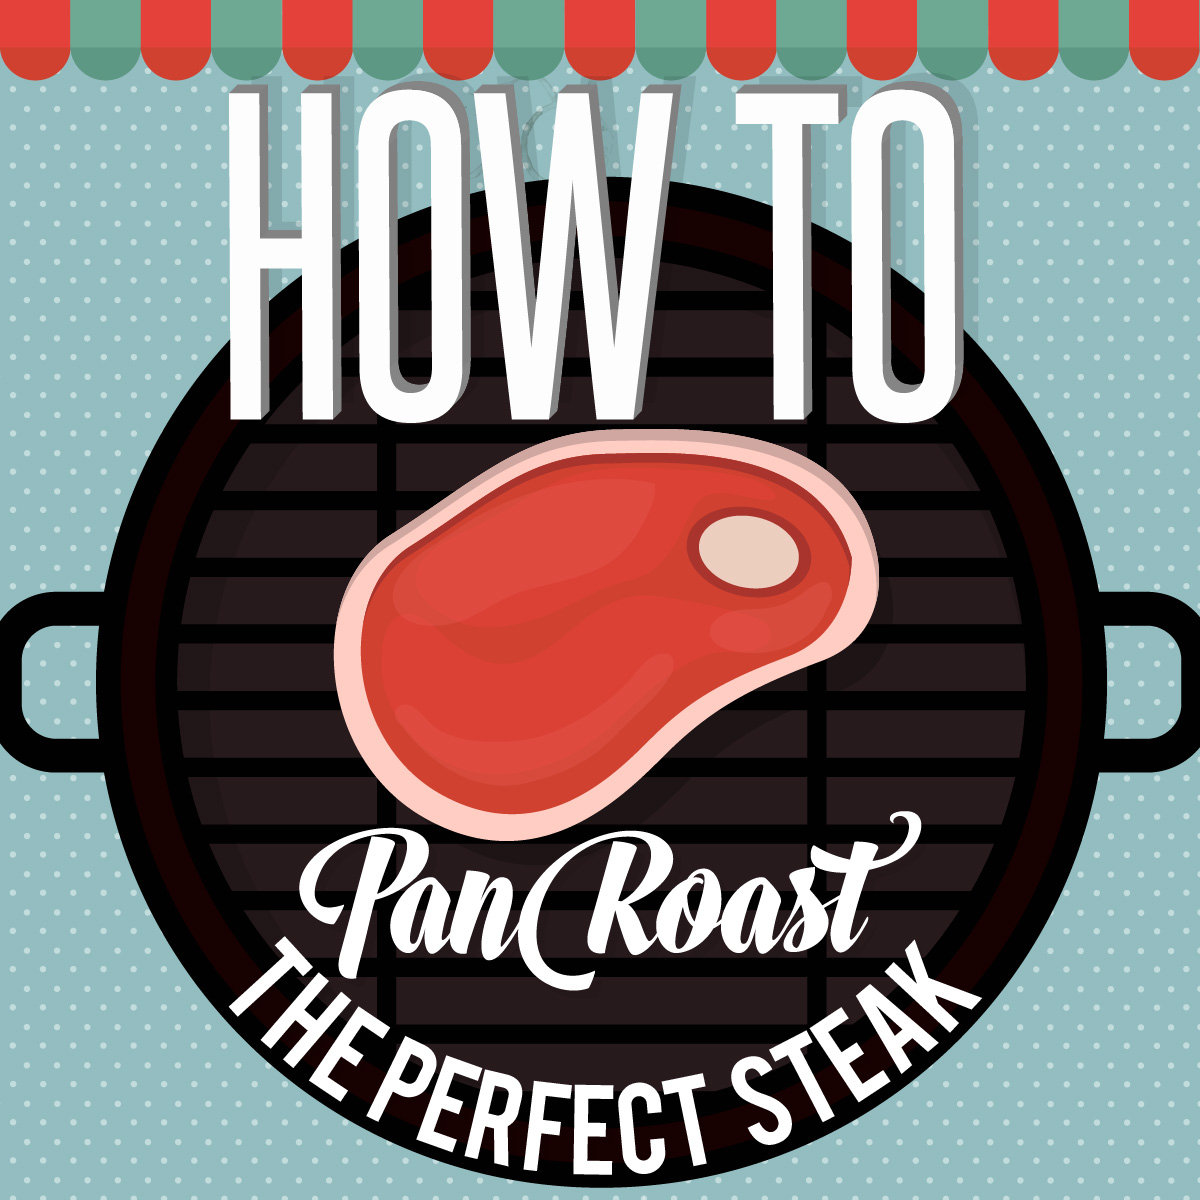 How To Pan Roast the Perfect Steak